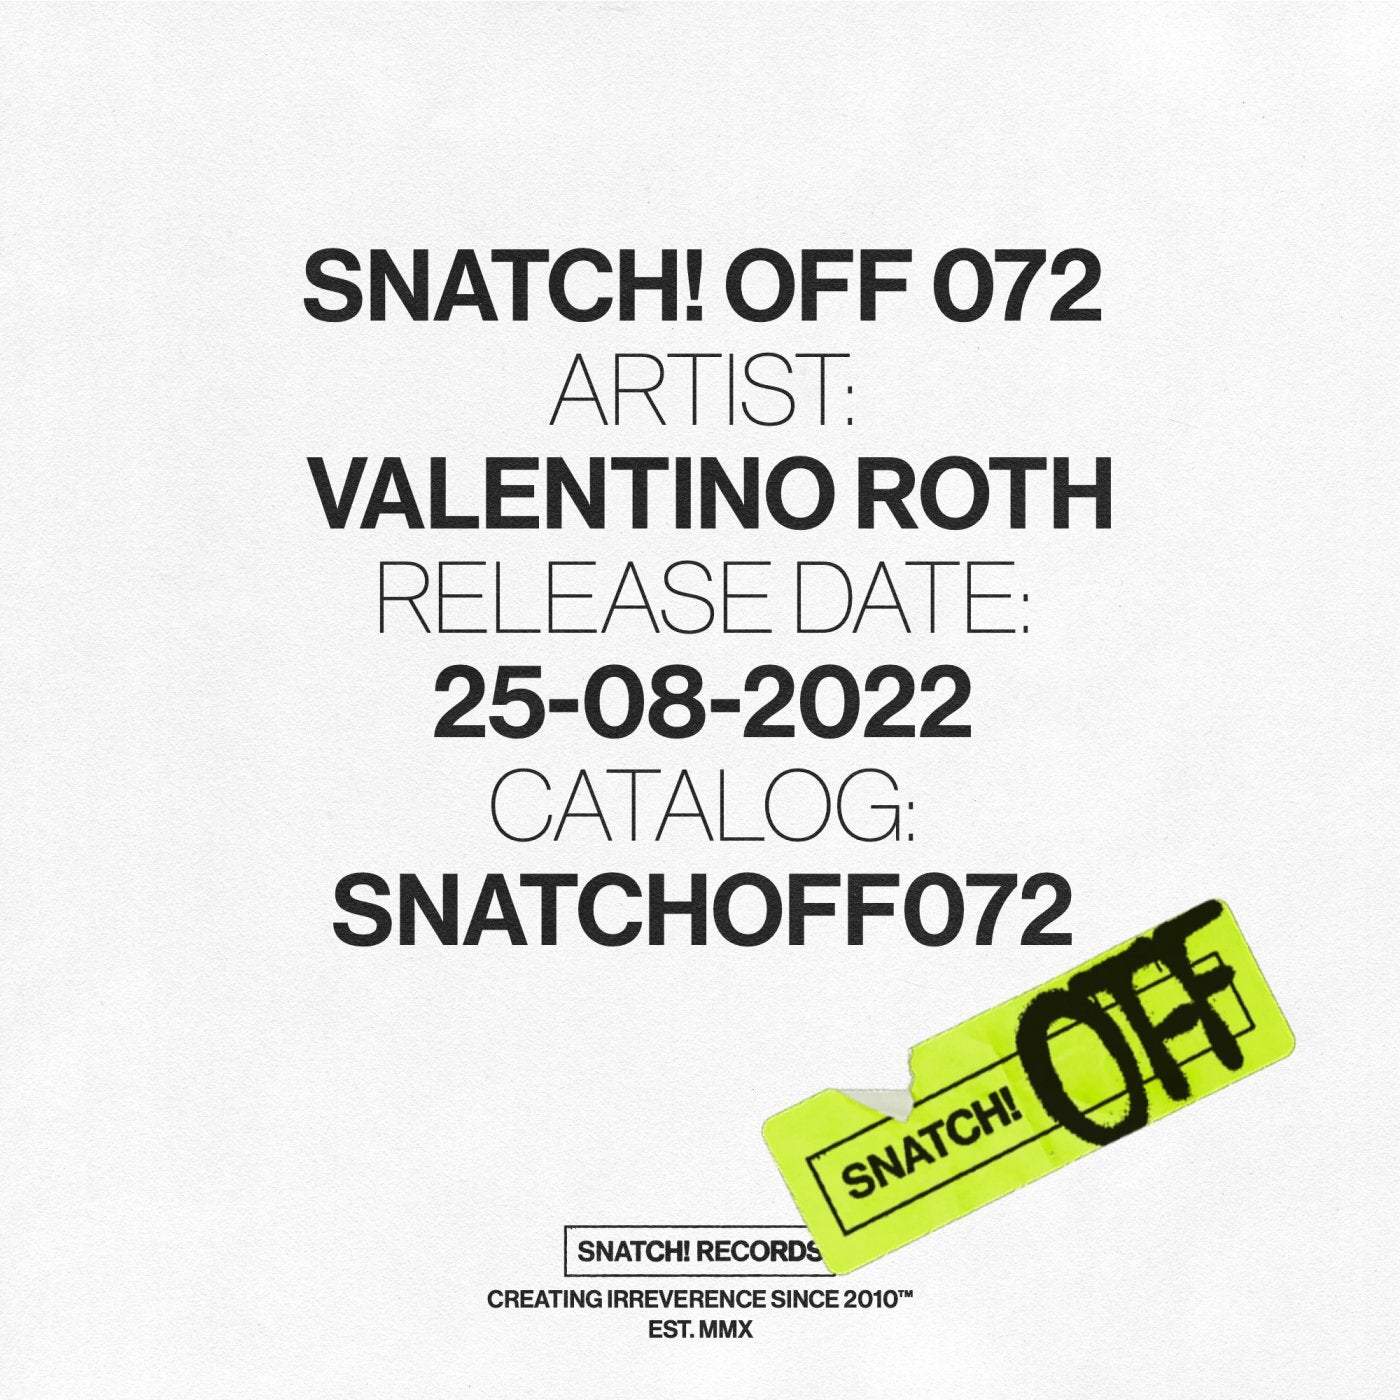 image cover: Valentino Roth - Snatch! OFF 072 / SNATCHOFF072